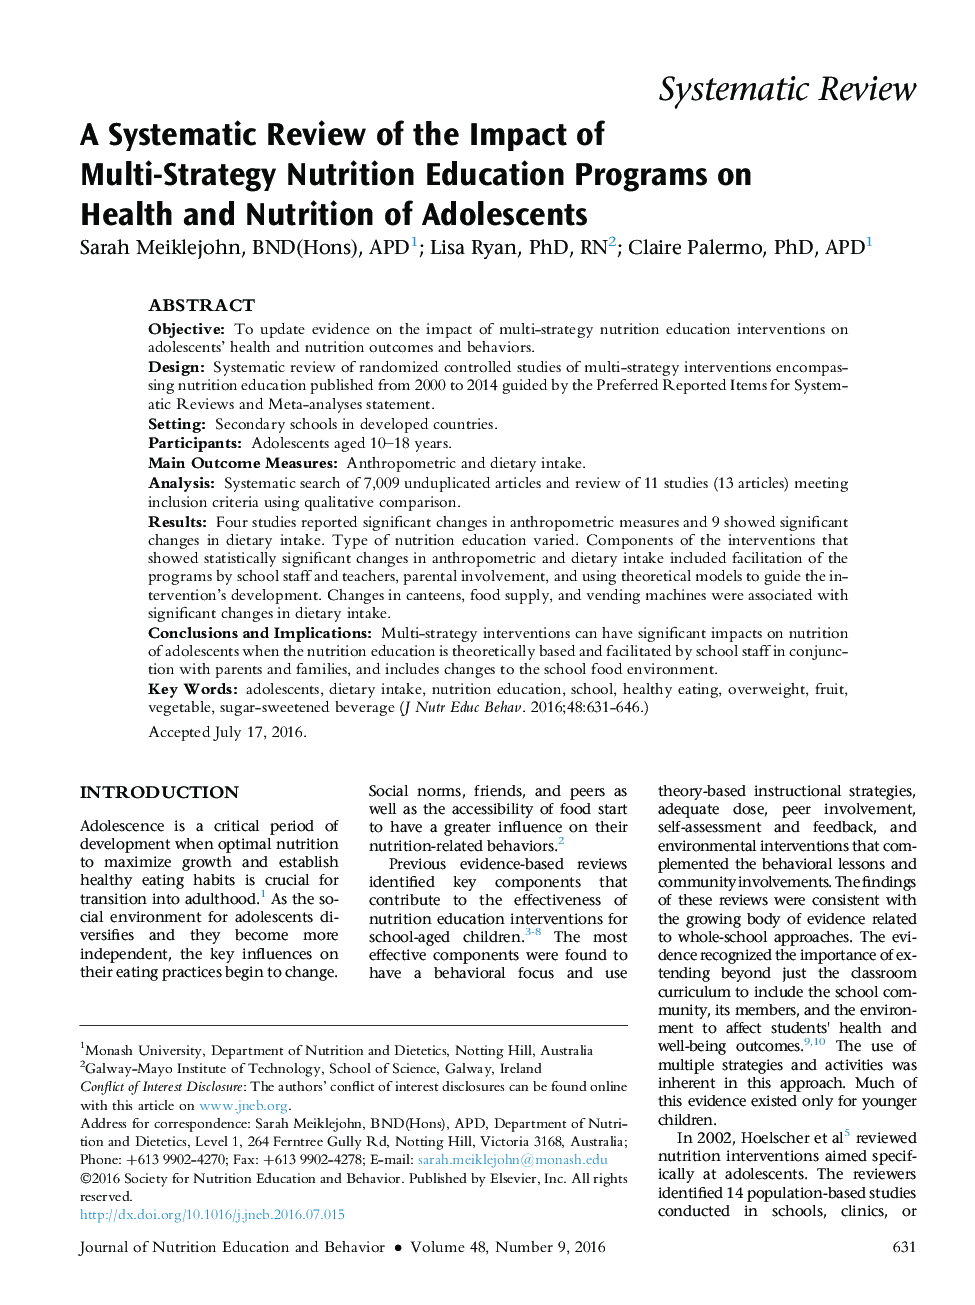 A Systematic Review of the Impact of Multi-Strategy Nutrition Education Programs on Health and Nutrition of Adolescents